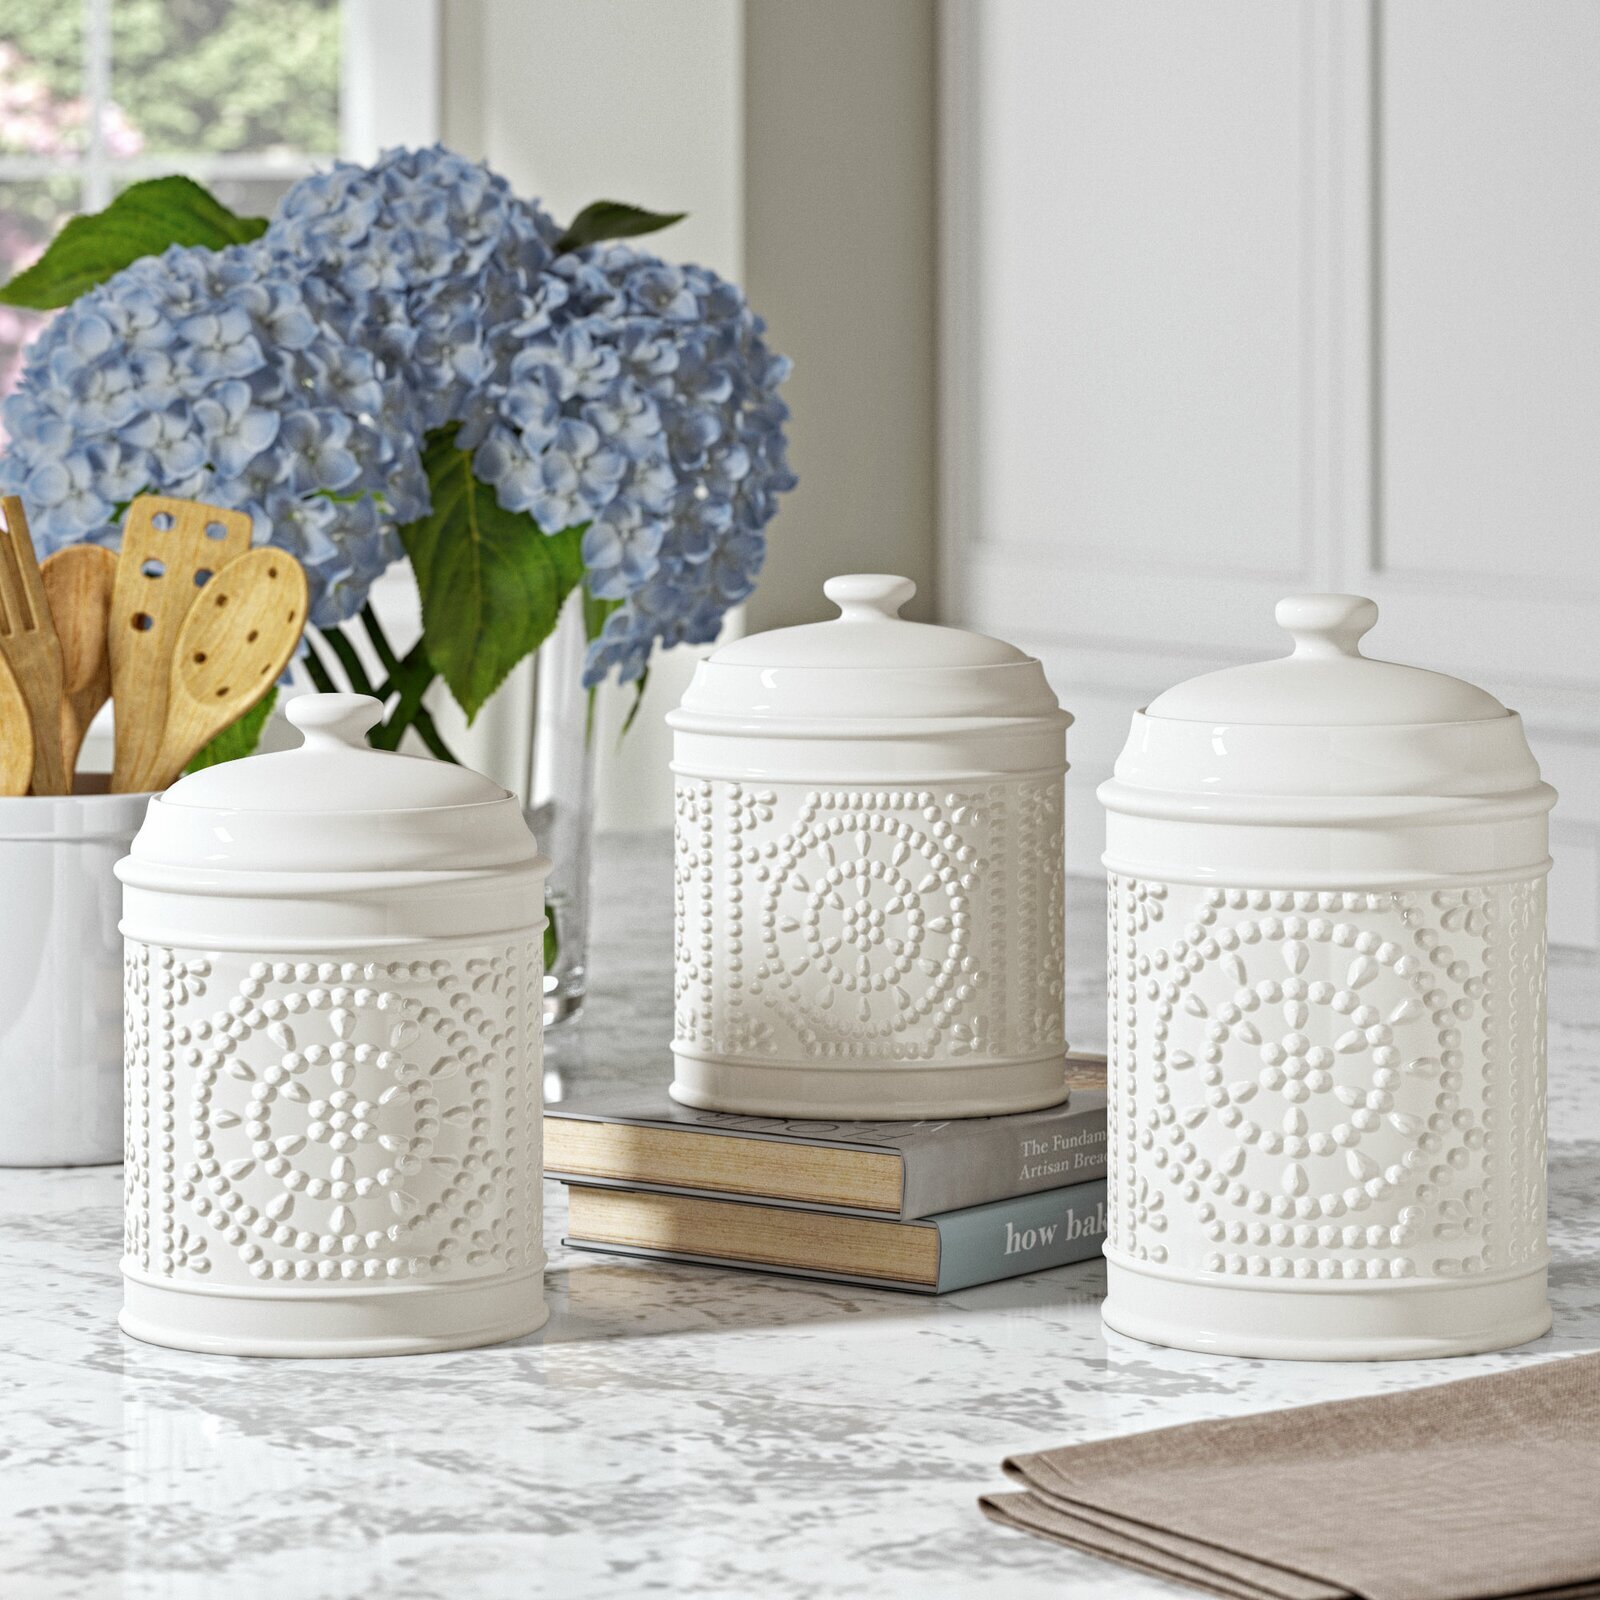 Embossed Decorative Kitchen Canisters   